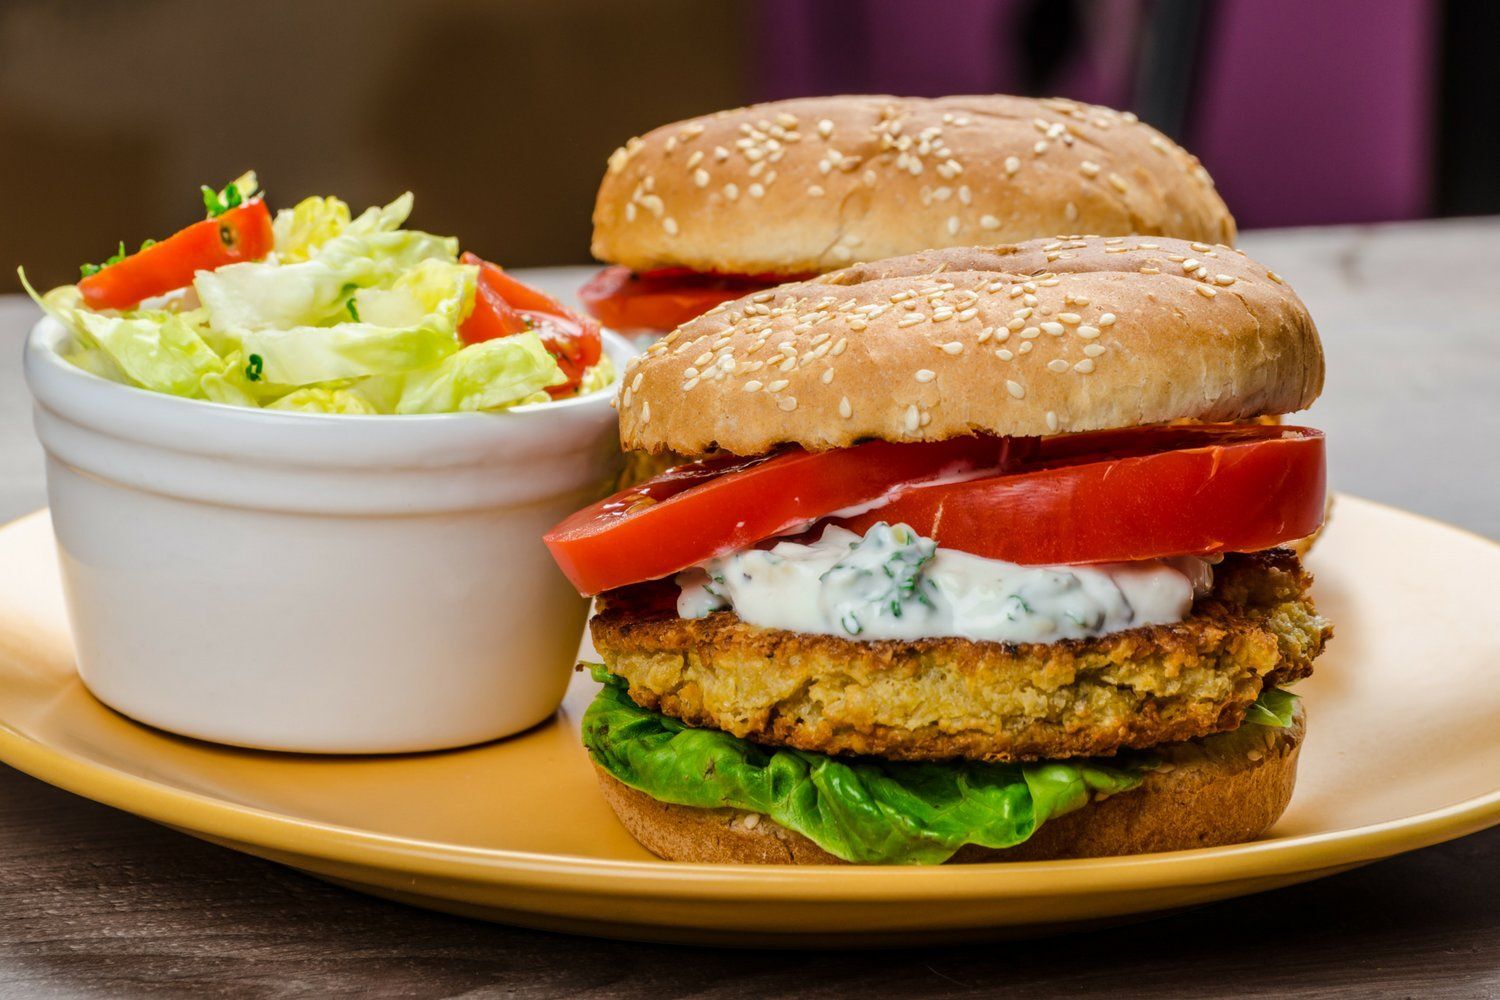 Chickpea burgers made with feta cheese topped with yogurt sauce, lettuce, and tomatoes.